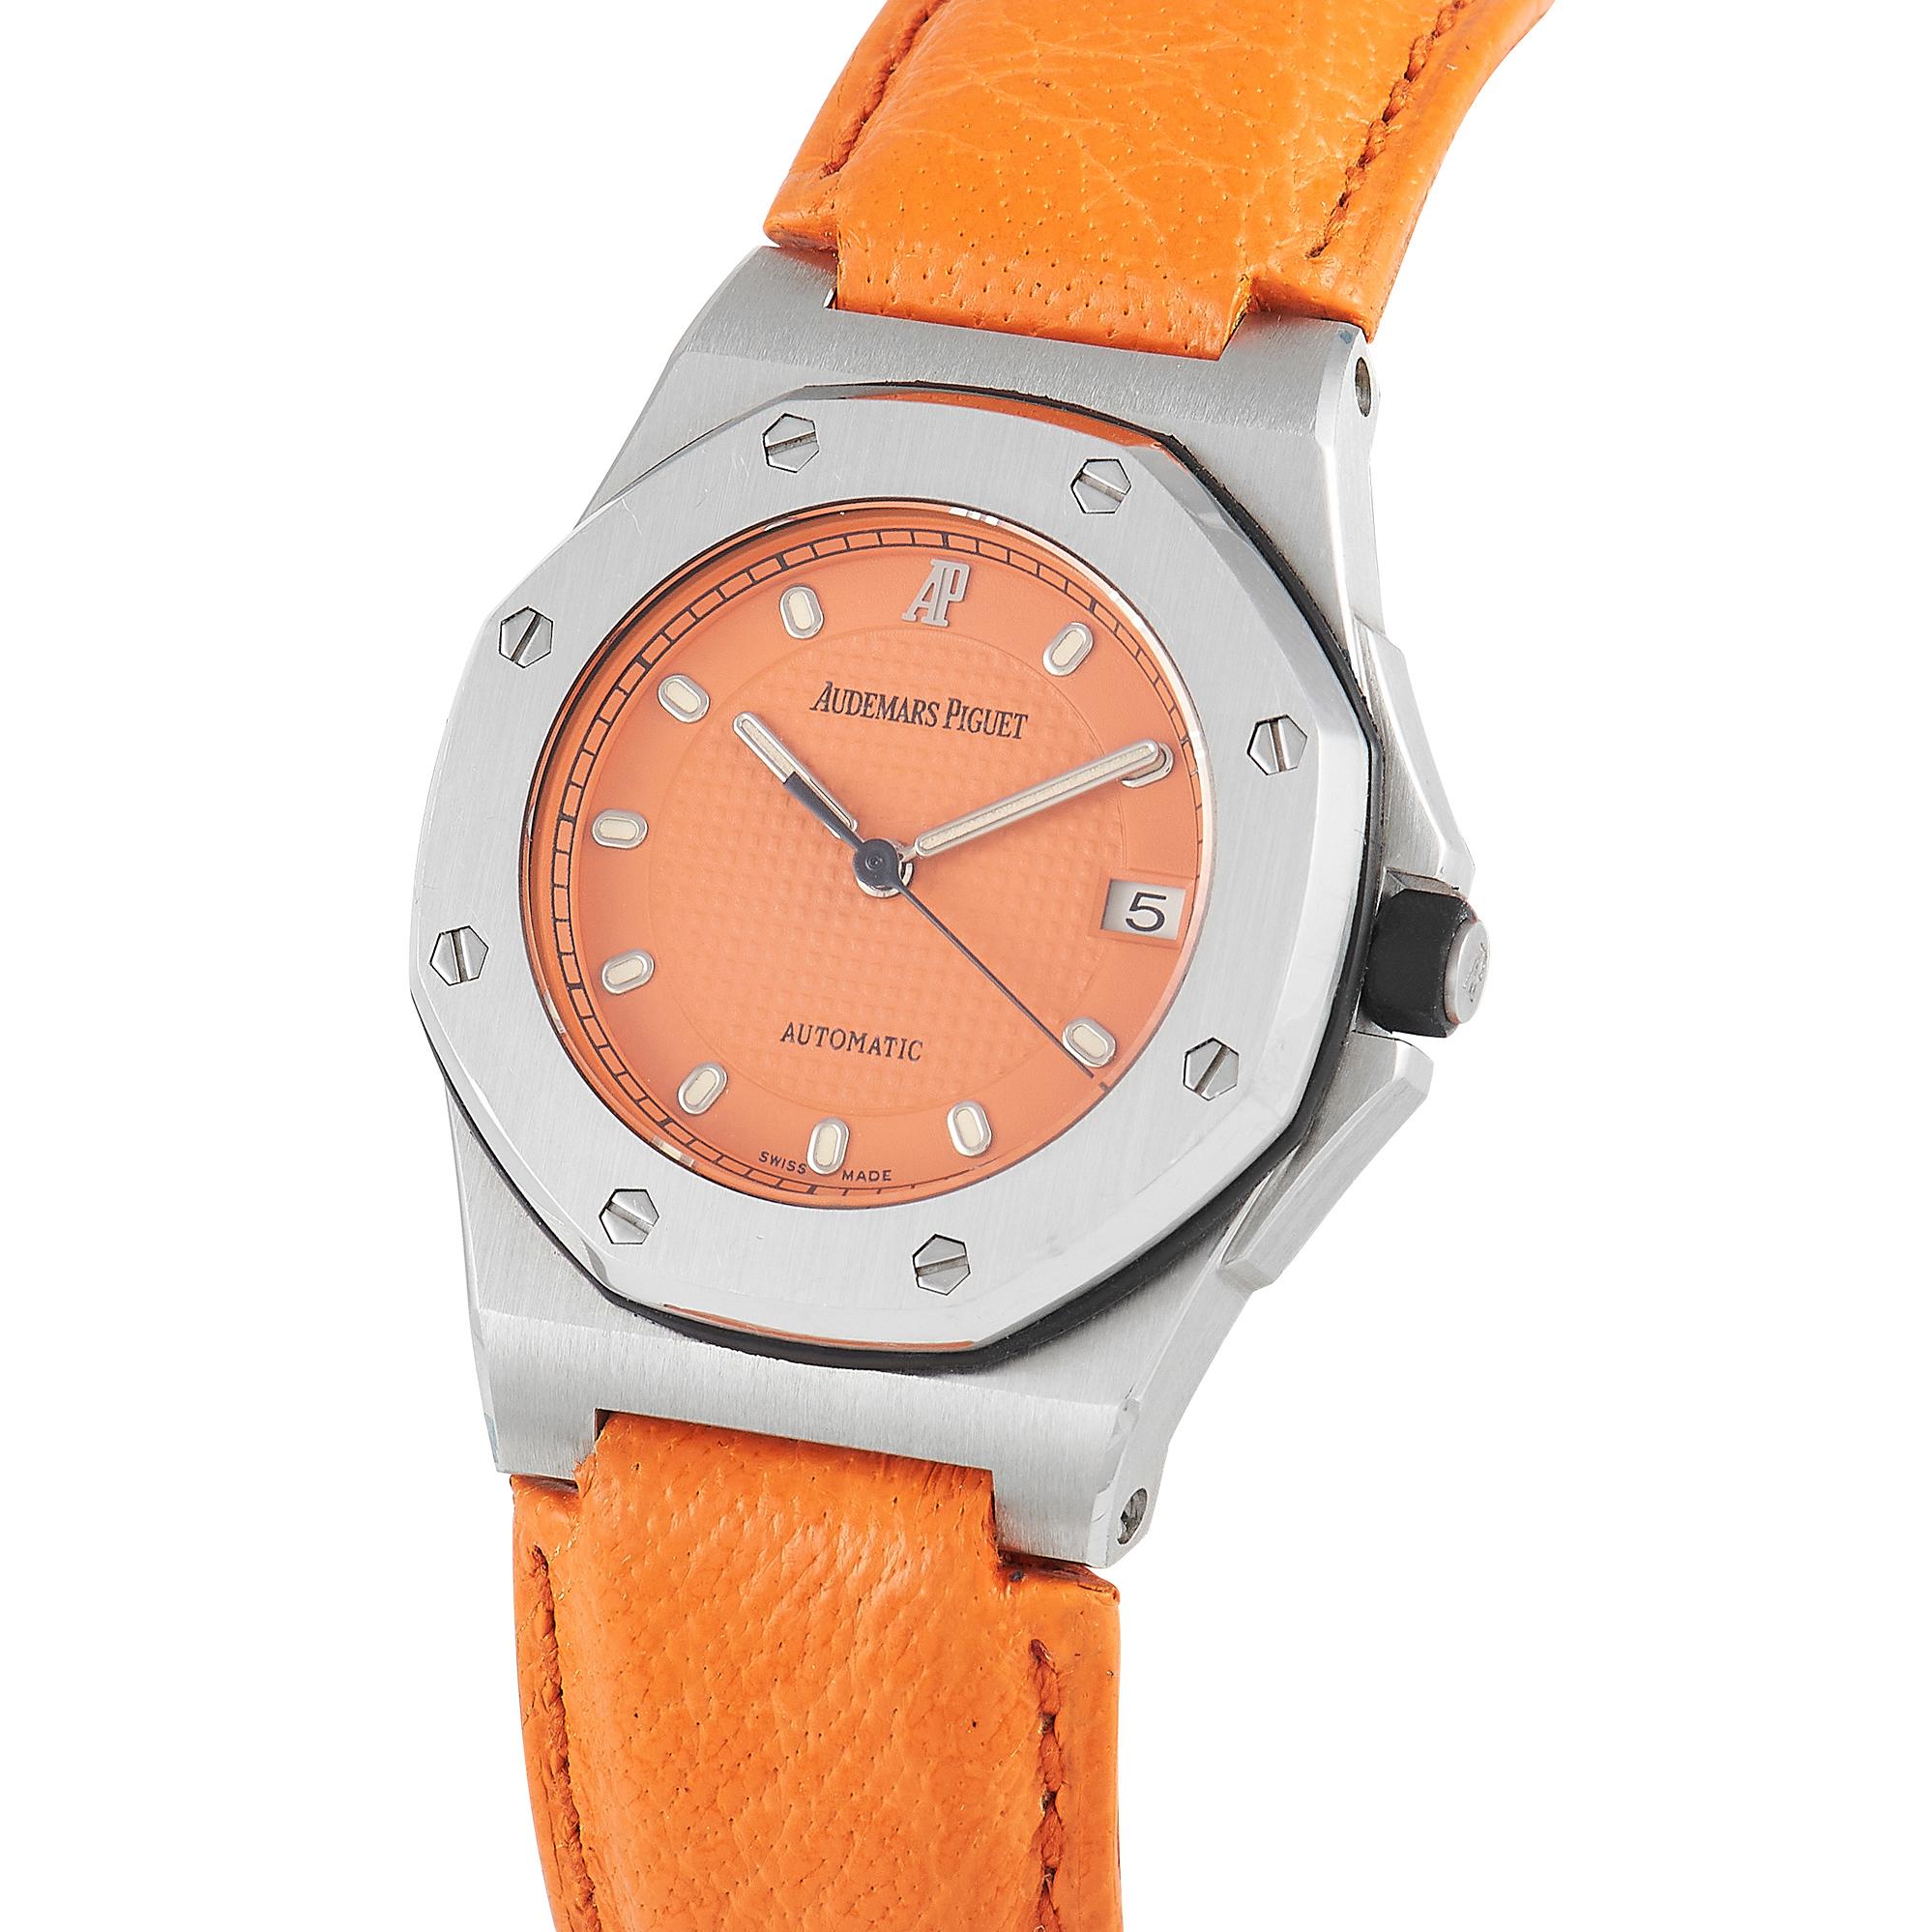 What's particularly delightful about this Audemars Piguet Royal Oak Offshore Ladies Watch is its bold yet still classy design.  On a mid-sized steel case is an orange dial that matches the color of the leather strap. The central portion bears a